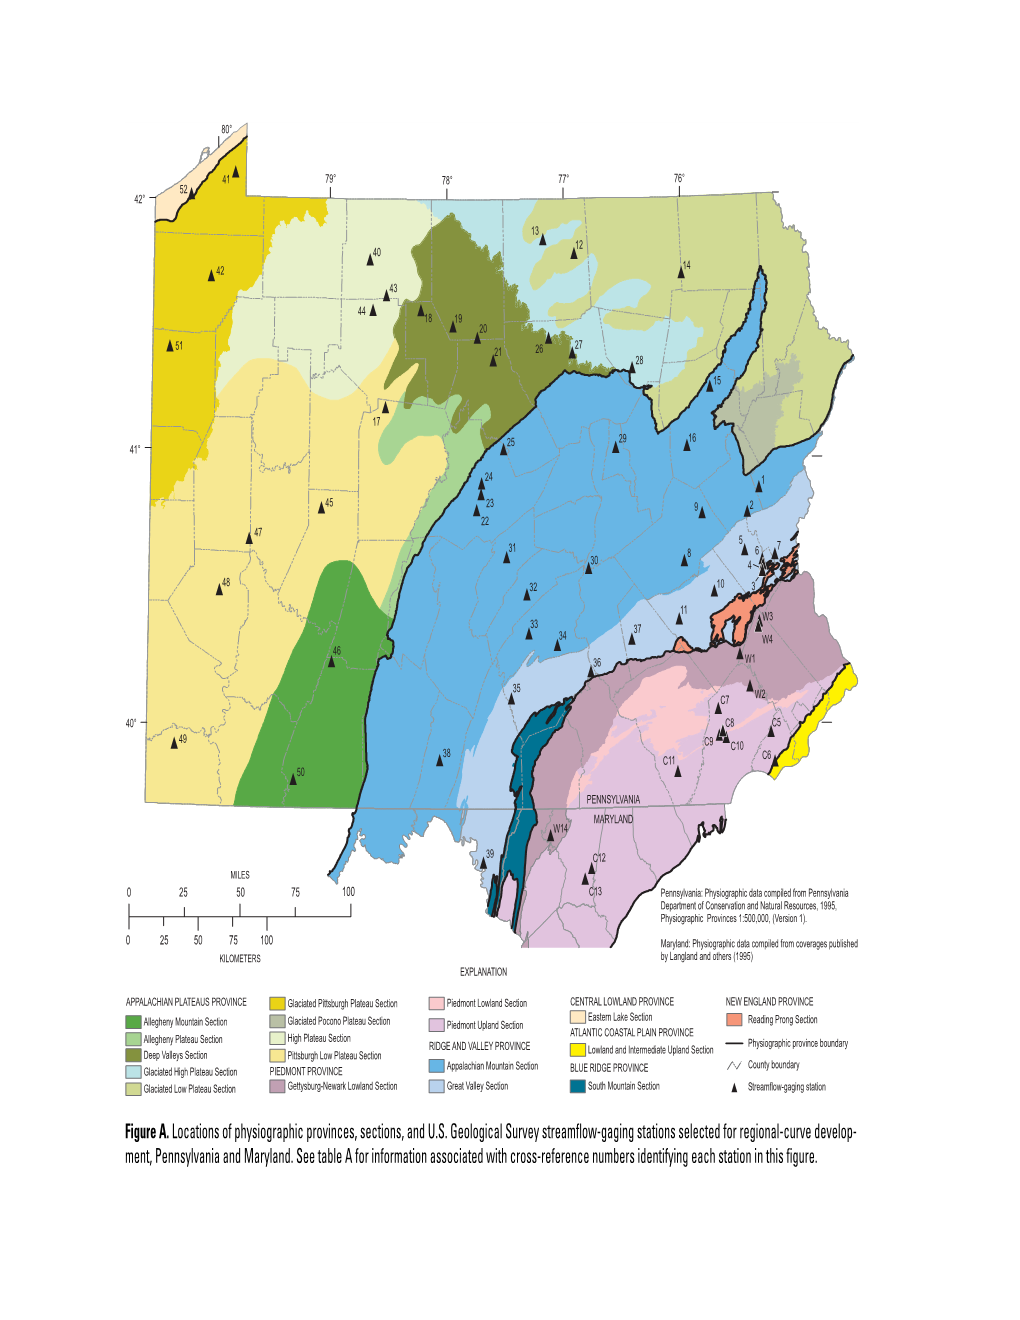 Figure A. Locations of Physiographic Provinces, Sections, and U.S